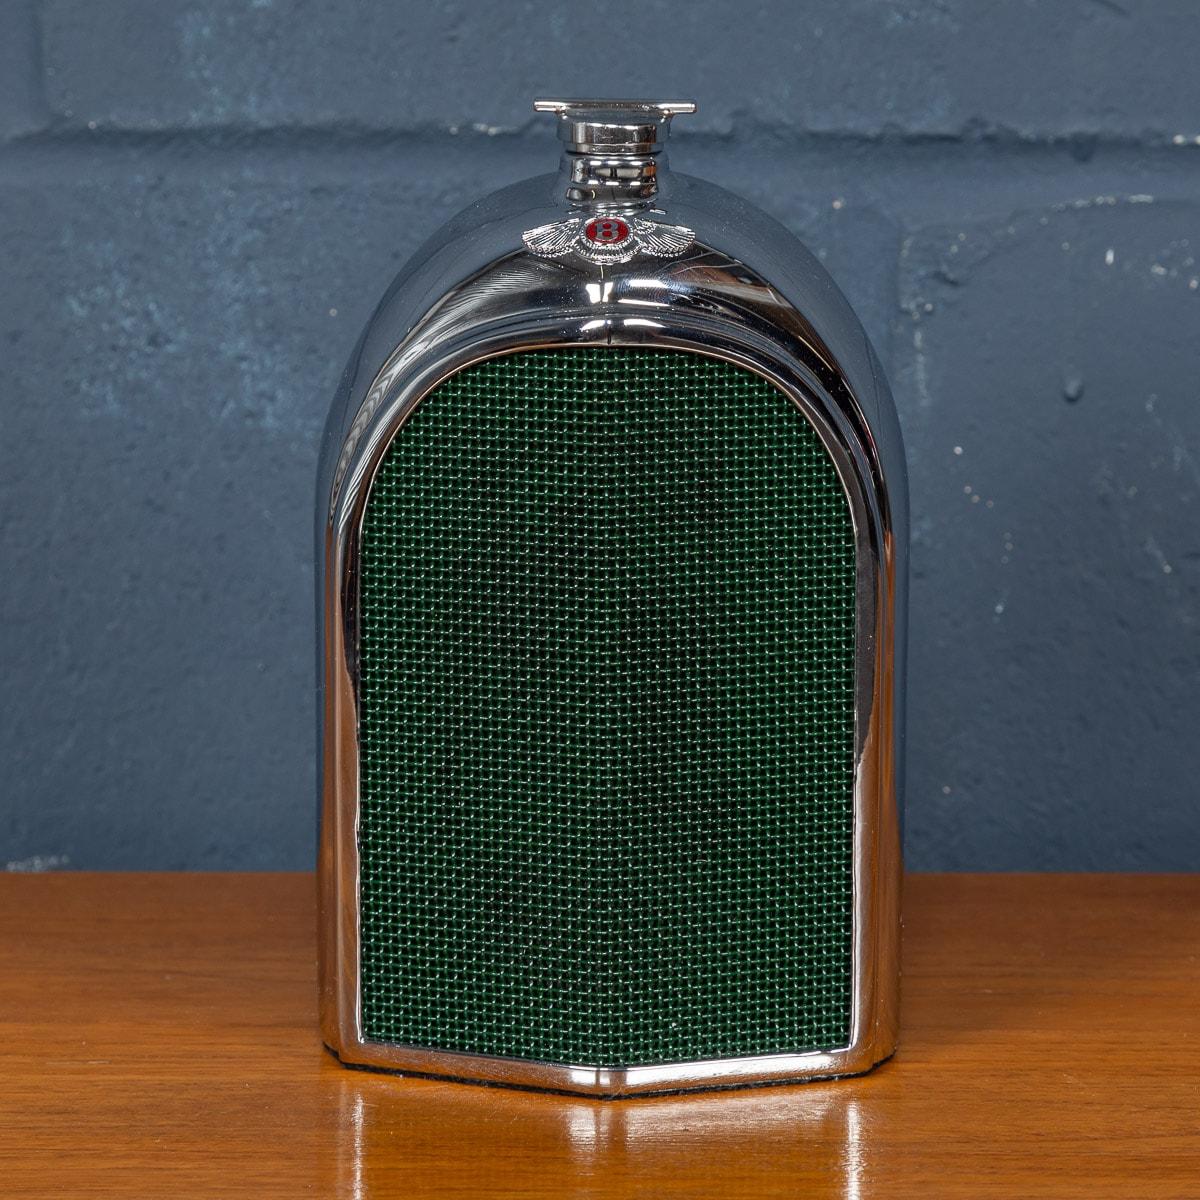 A vintage Bentley chrome radiator grille decanter made in England in the 1960s, bearing the red enamel radiator badge. The decanter is equipped with a “slot” in the casing at the rear allowing visibility of the contents with baize cloth to the base.